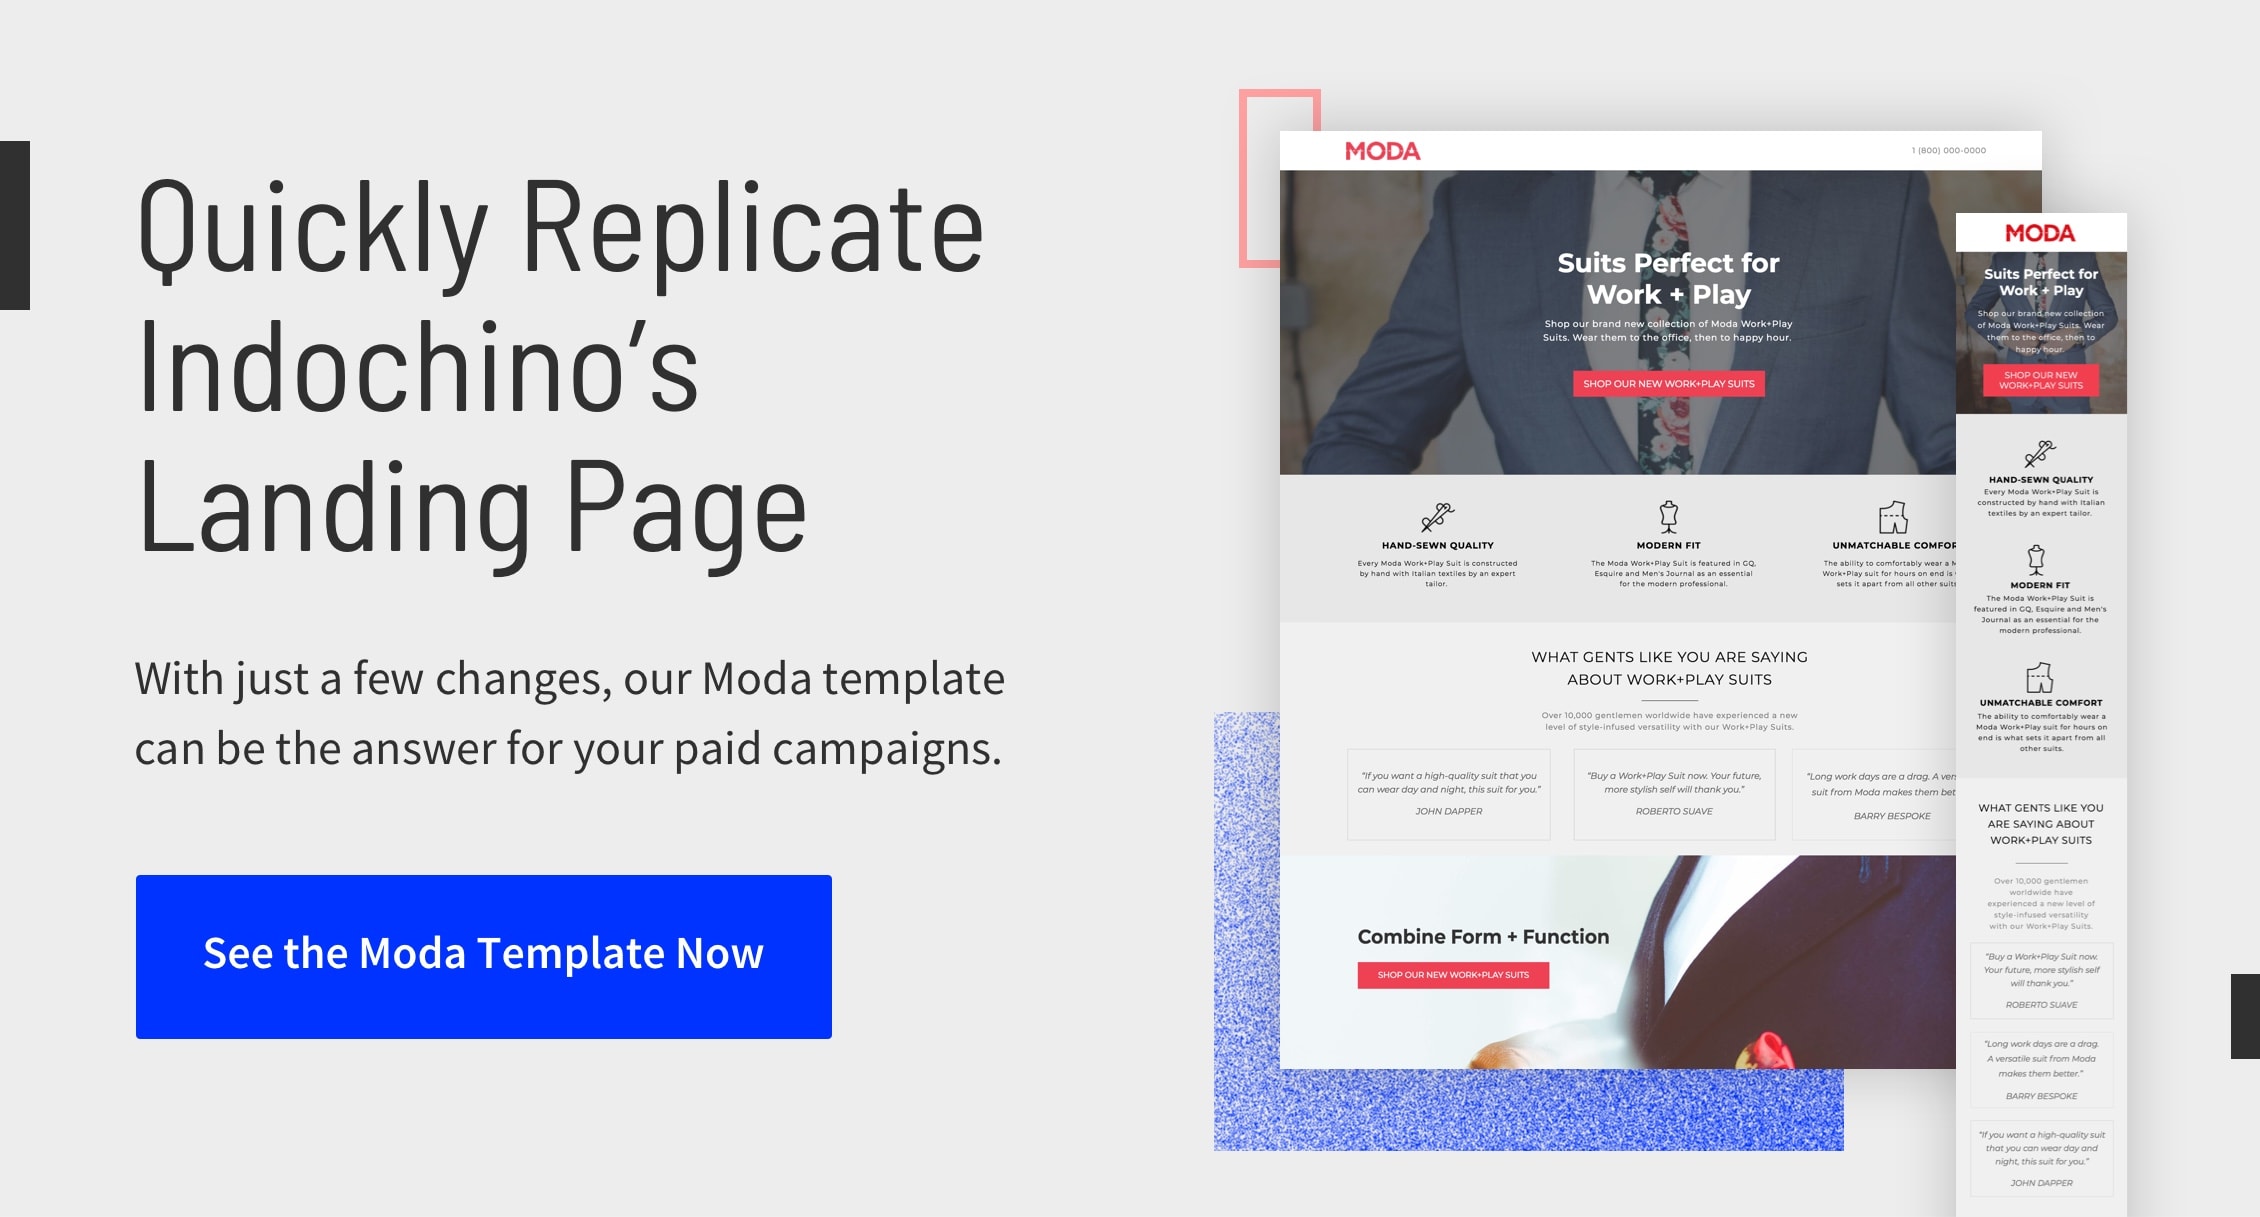 Quickly Replicate Indochino's Landing Page - Get the Template